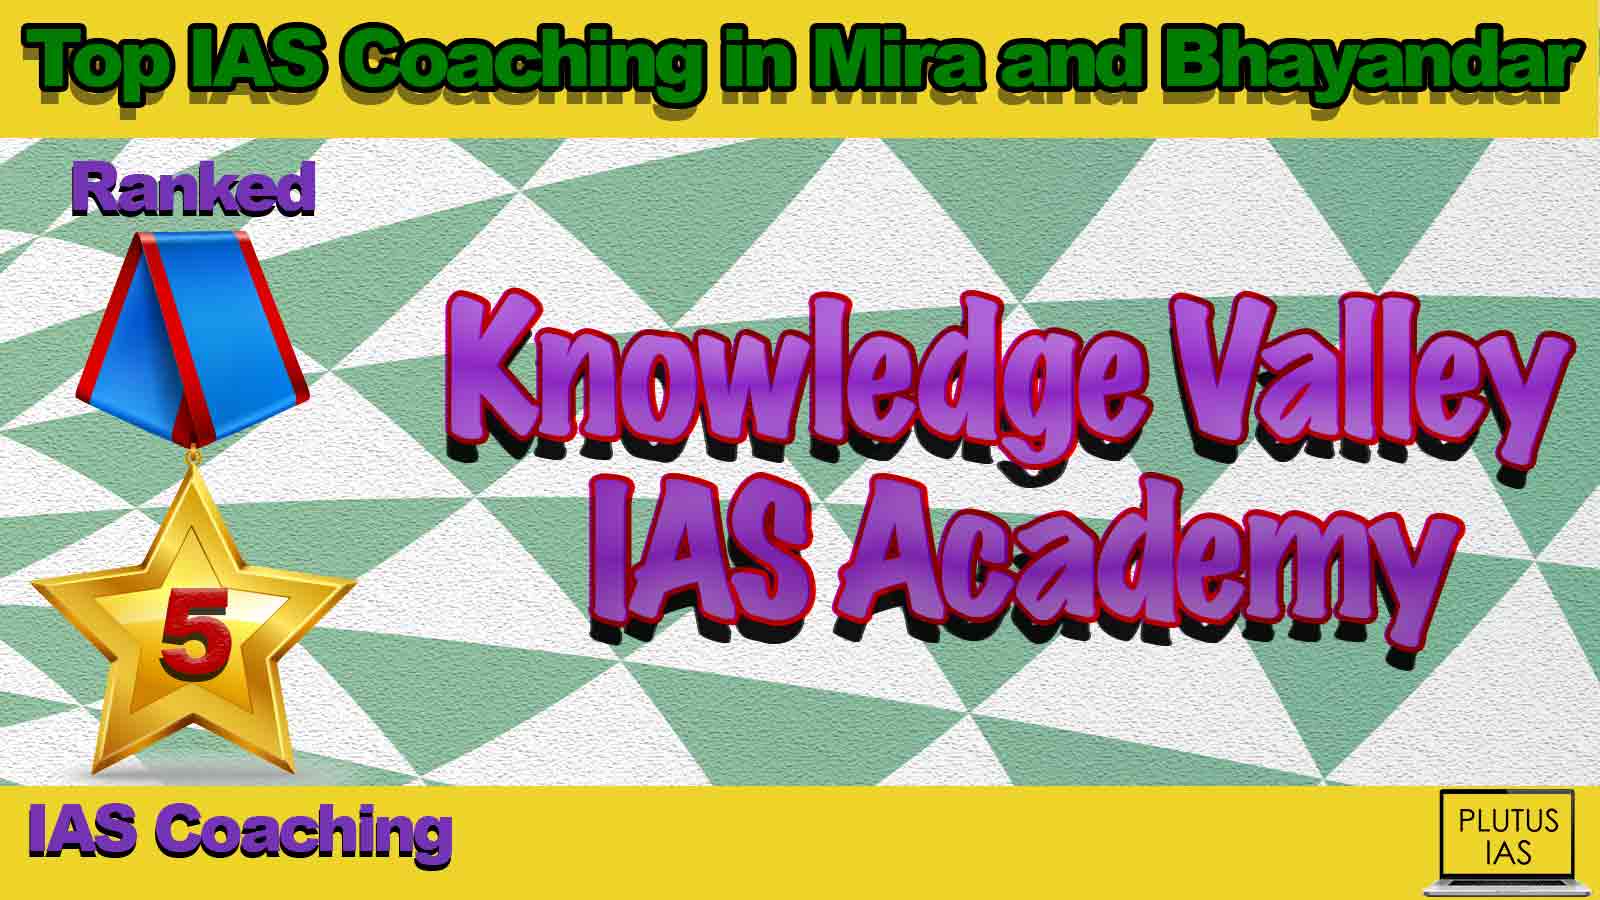 Best IAS Coaching in Mira and Bhayandar